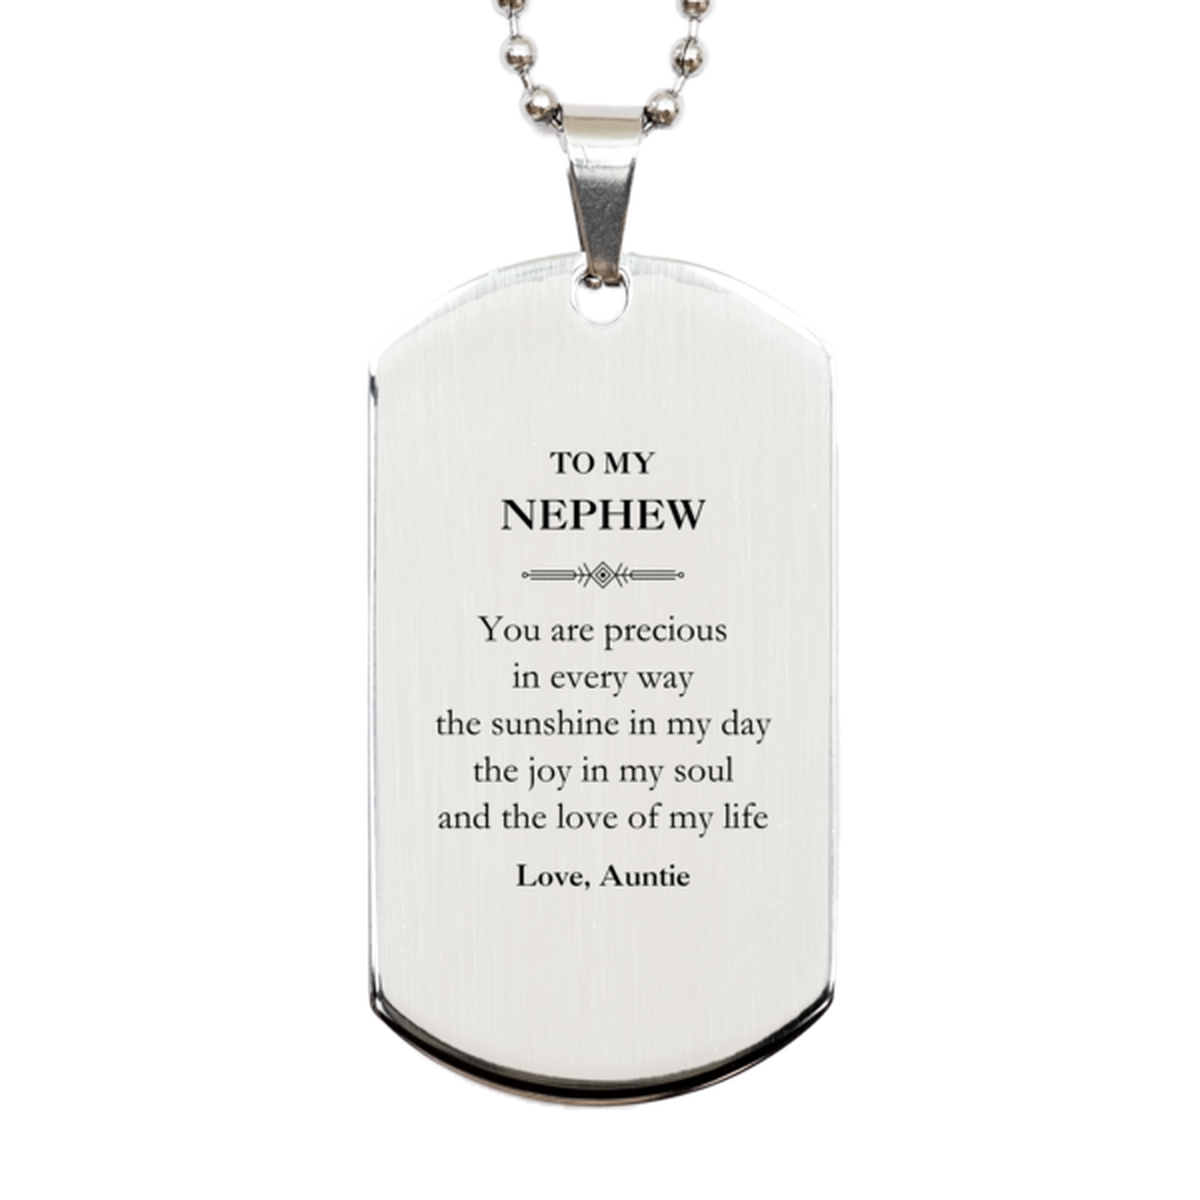 Graduation Gifts for Nephew Silver Dog Tag Present from Auntie, Christmas Nephew Birthday Gifts Nephew You are precious in every way the sunshine in my day. Love, Auntie